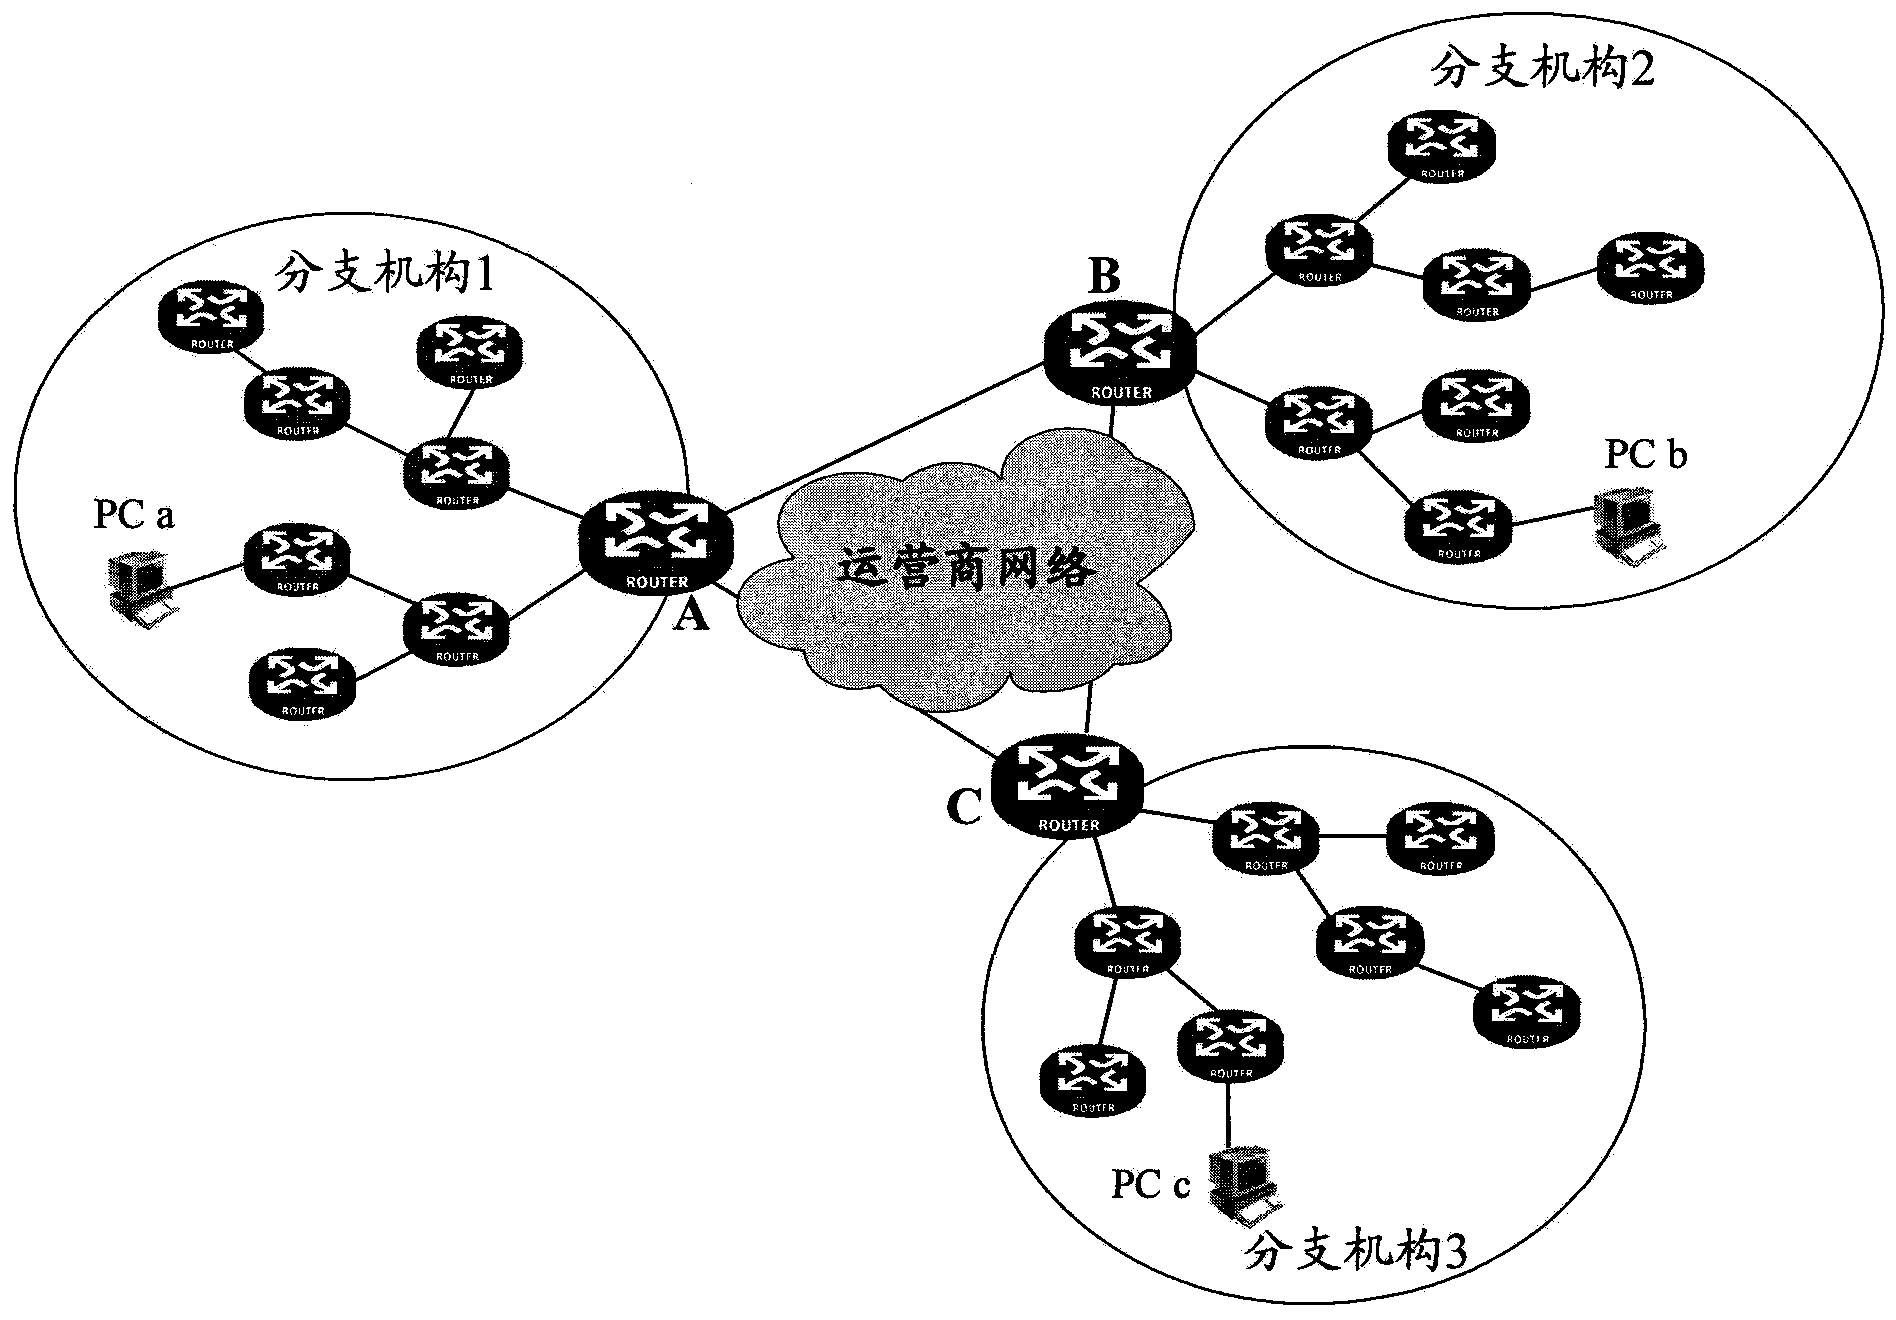 Communication method among branches and egress routers of branches